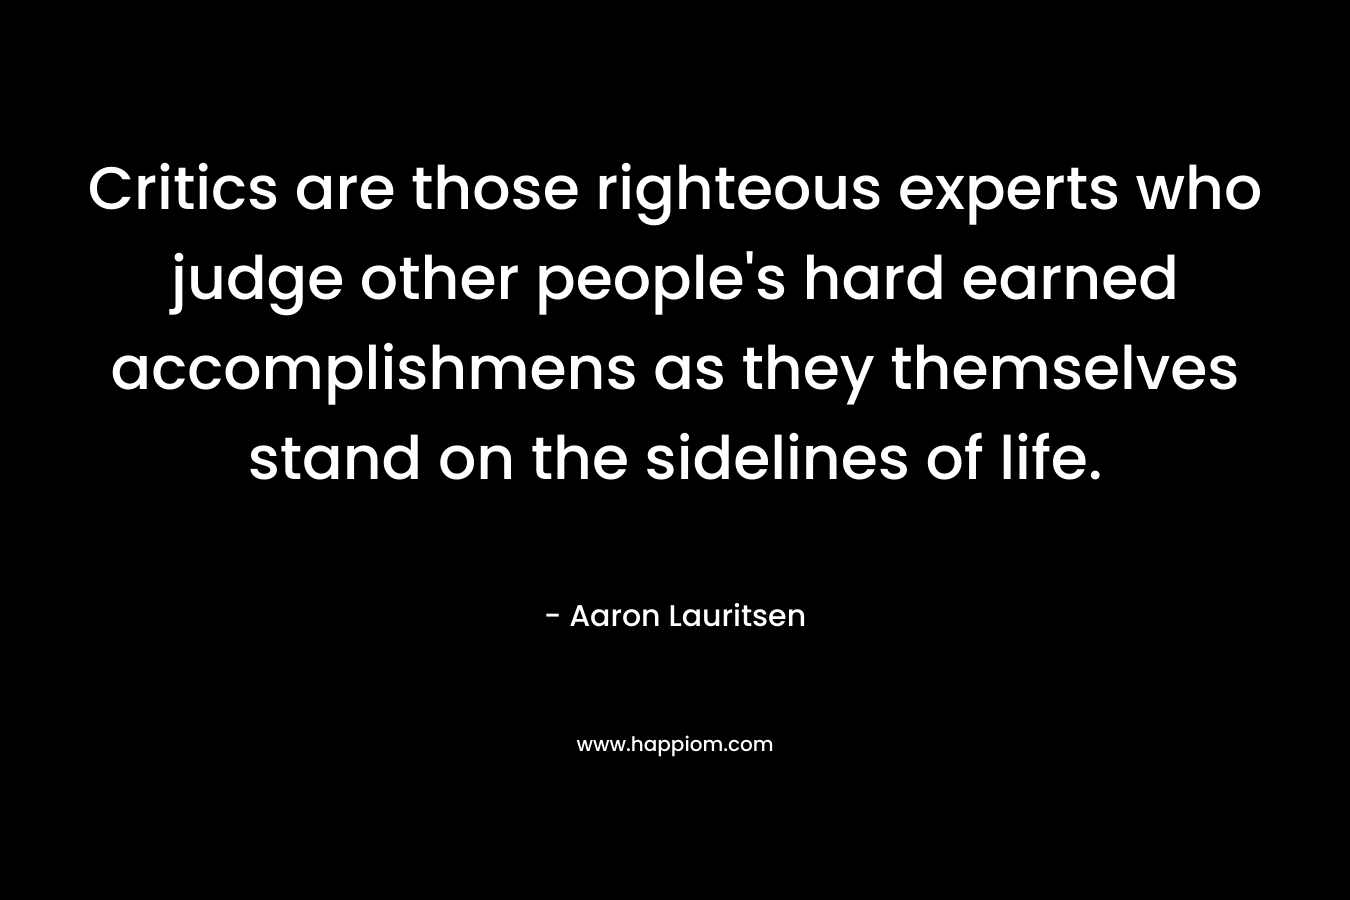 Critics are those righteous experts who judge other people's hard earned accomplishmens as they themselves stand on the sidelines of life.